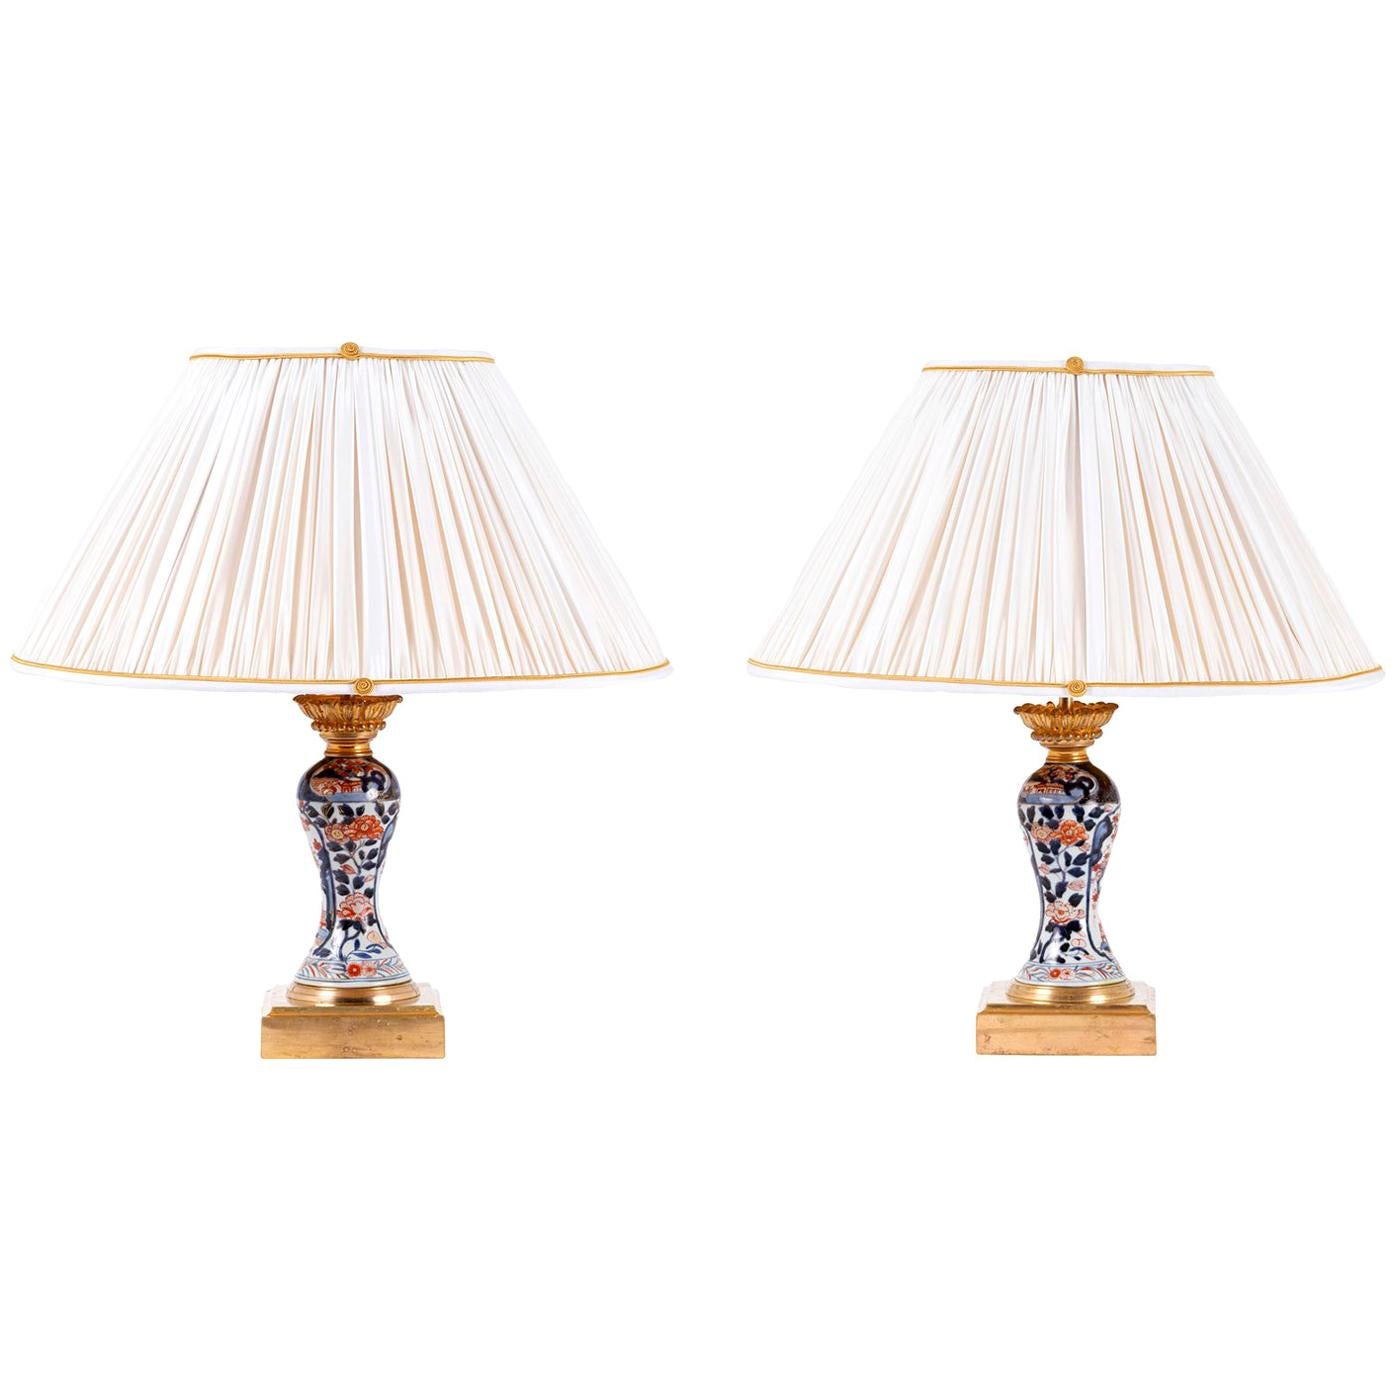 Pair of Porcelain Lamps with Imari Decor, Late 19th Century